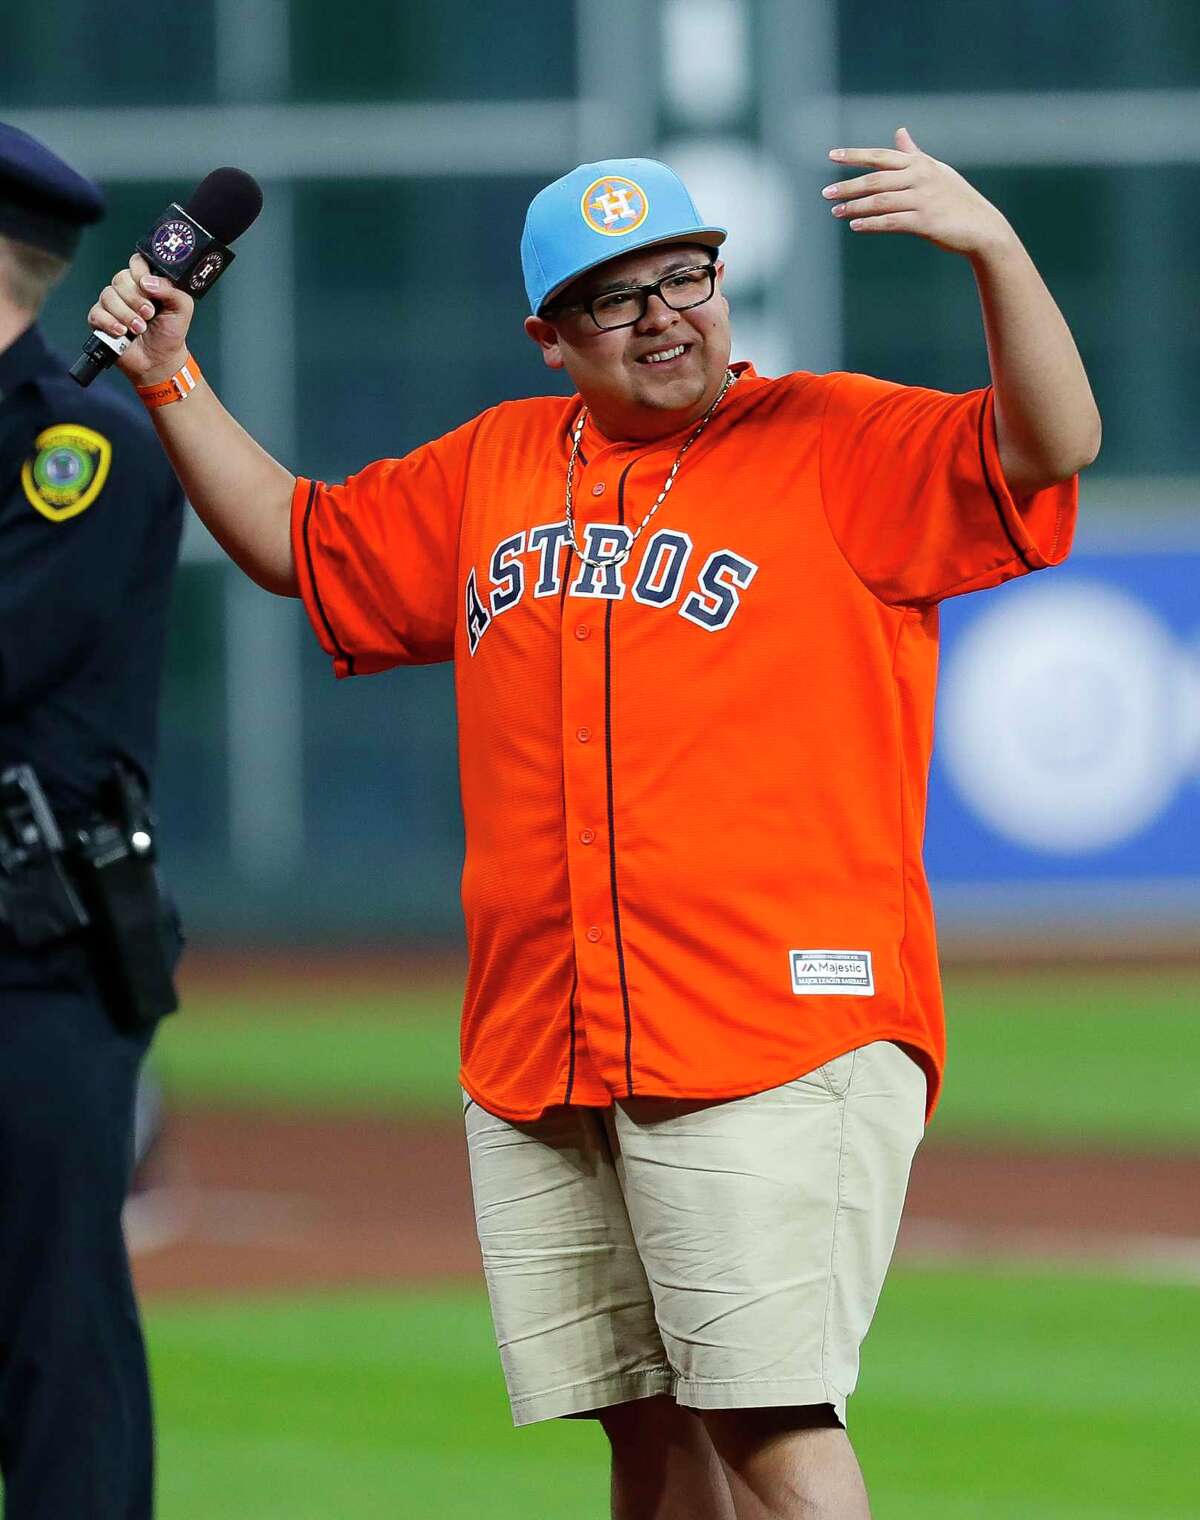 PHOTOS: Rico Rodriguez supporting Houston sports team Actor Rico Rodriguez, who plays Manny Delgado in the sitcom Modern Family, says play ball before Game 4 of the World Series at Minute Maid Park on Saturday, Oct. 28, 2017, in Houston. Browse through the photos above for a look at Rico Rodriguez supporting Houston sports teams at games.